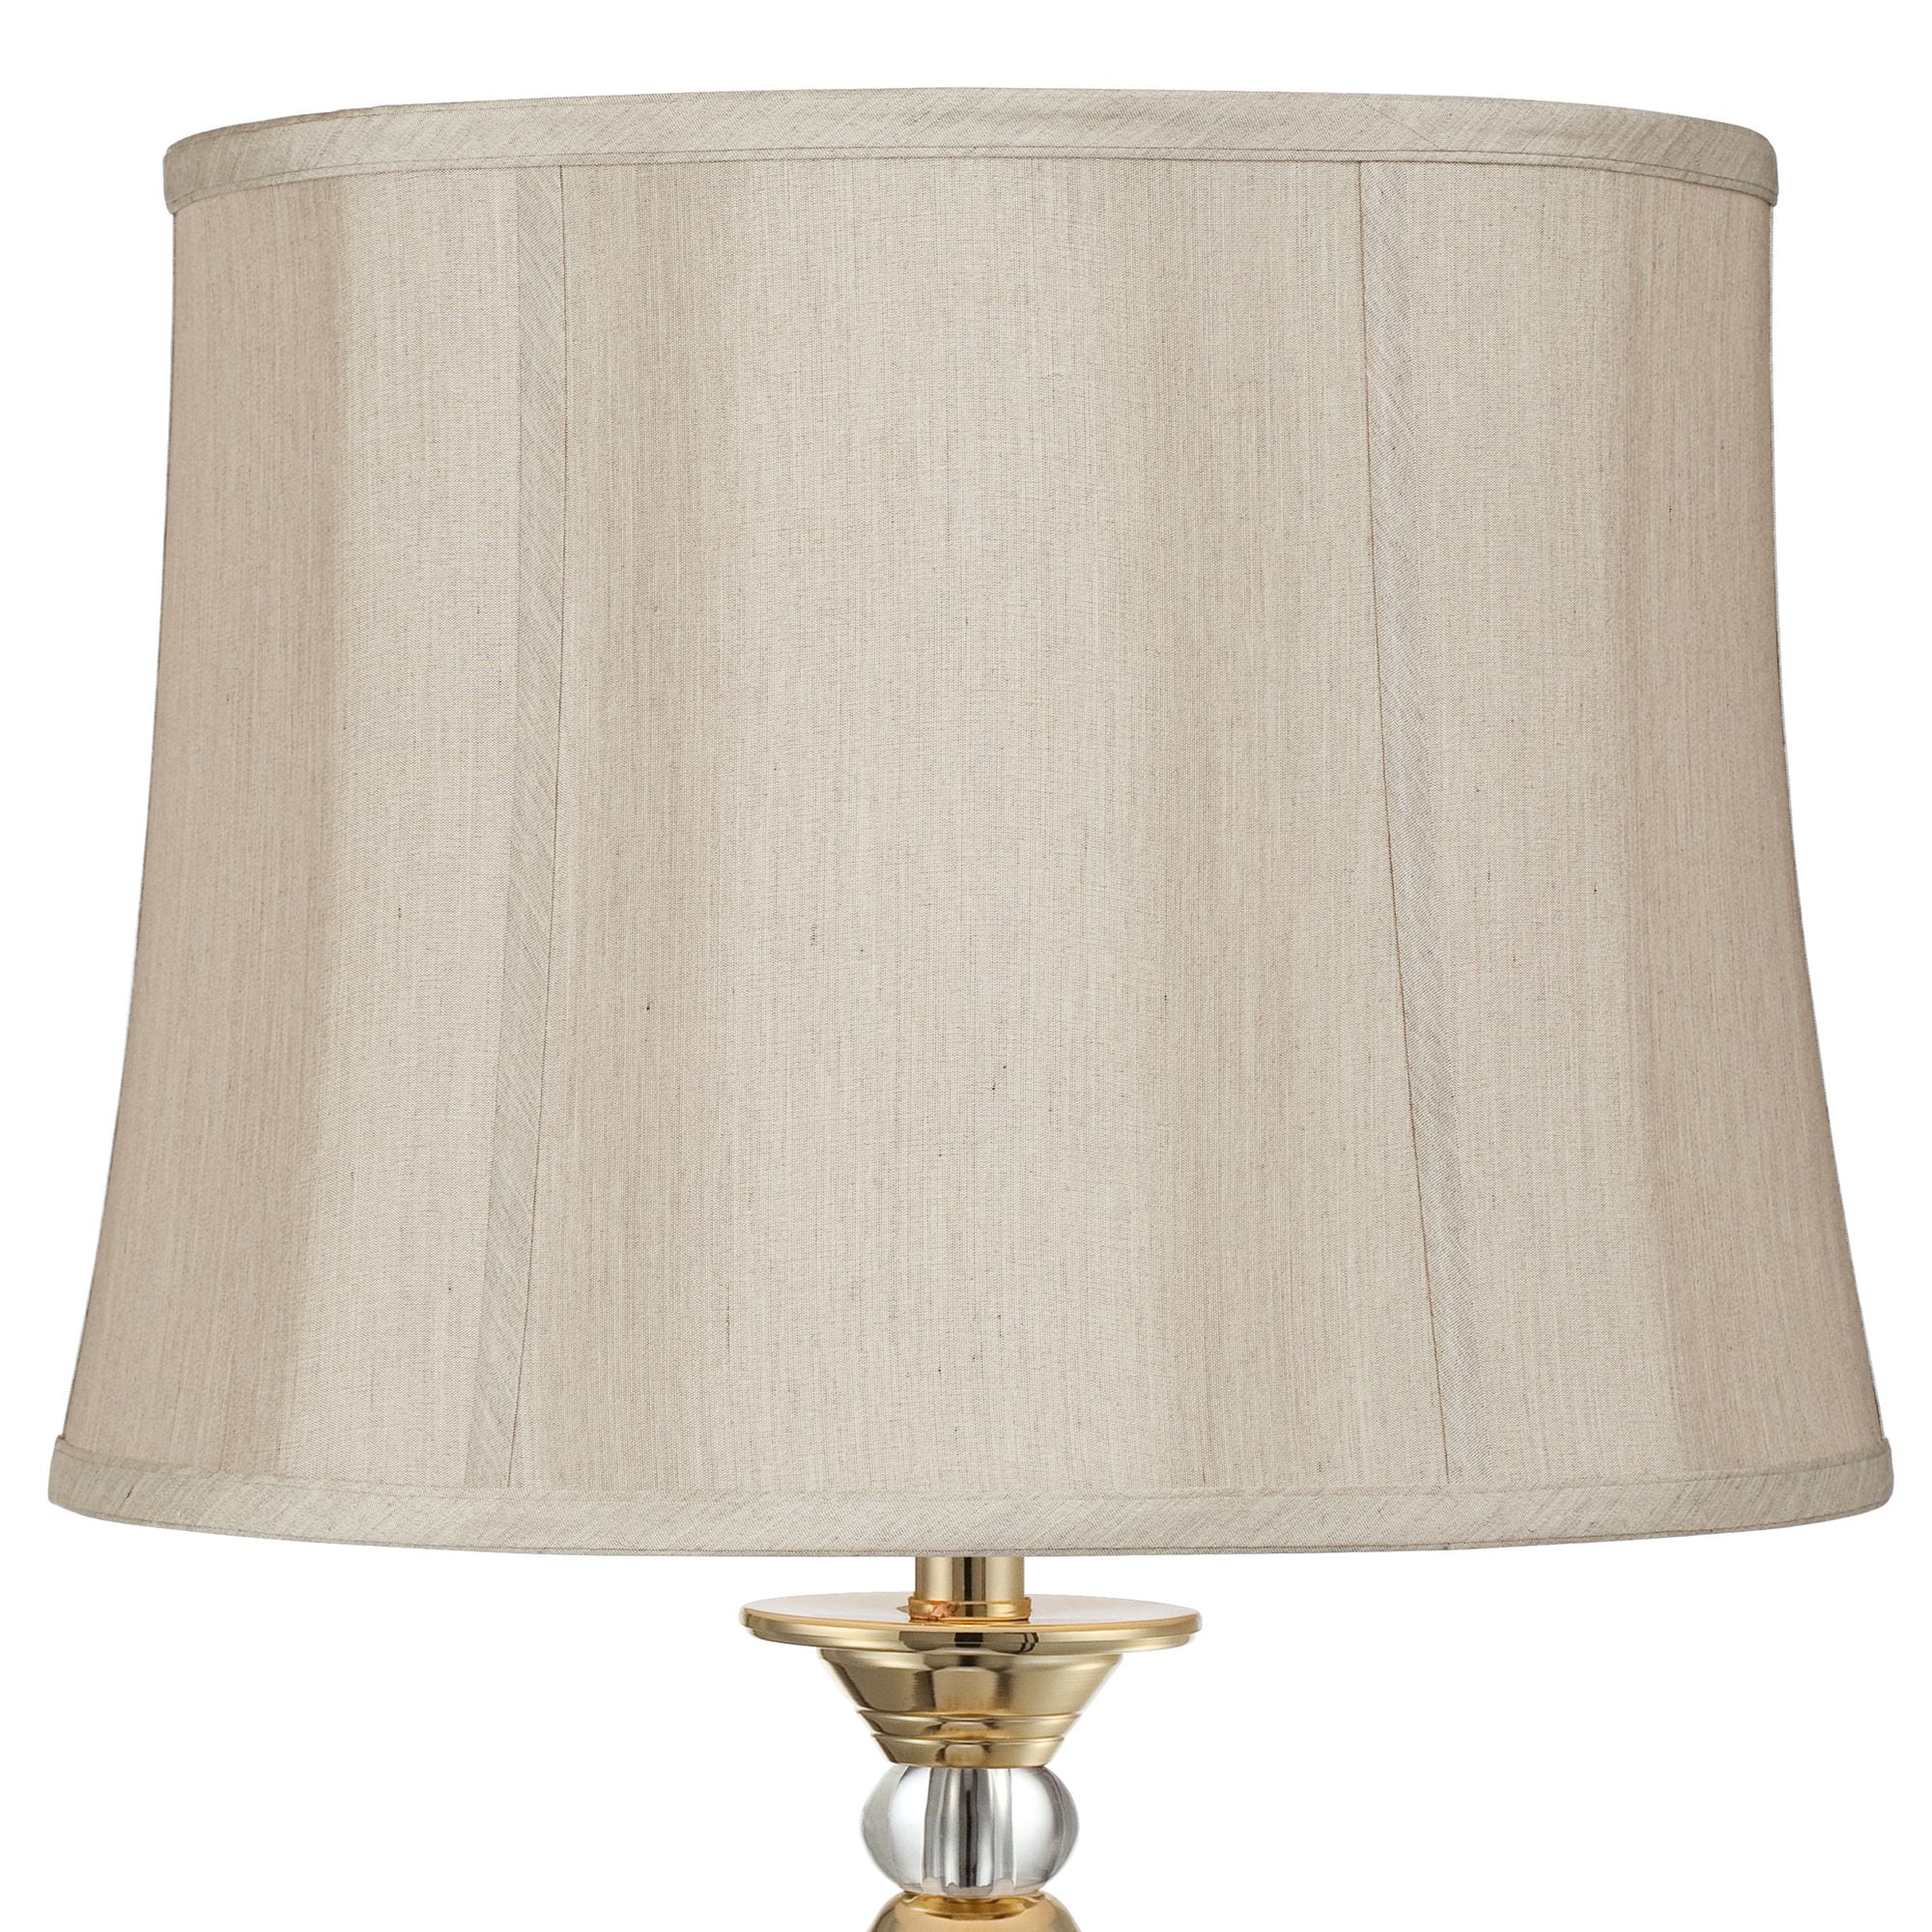 Details about   Beige Sandstone Textured Fabric Lamp Shade Light Shade Various Sizes 20cm 80cm 